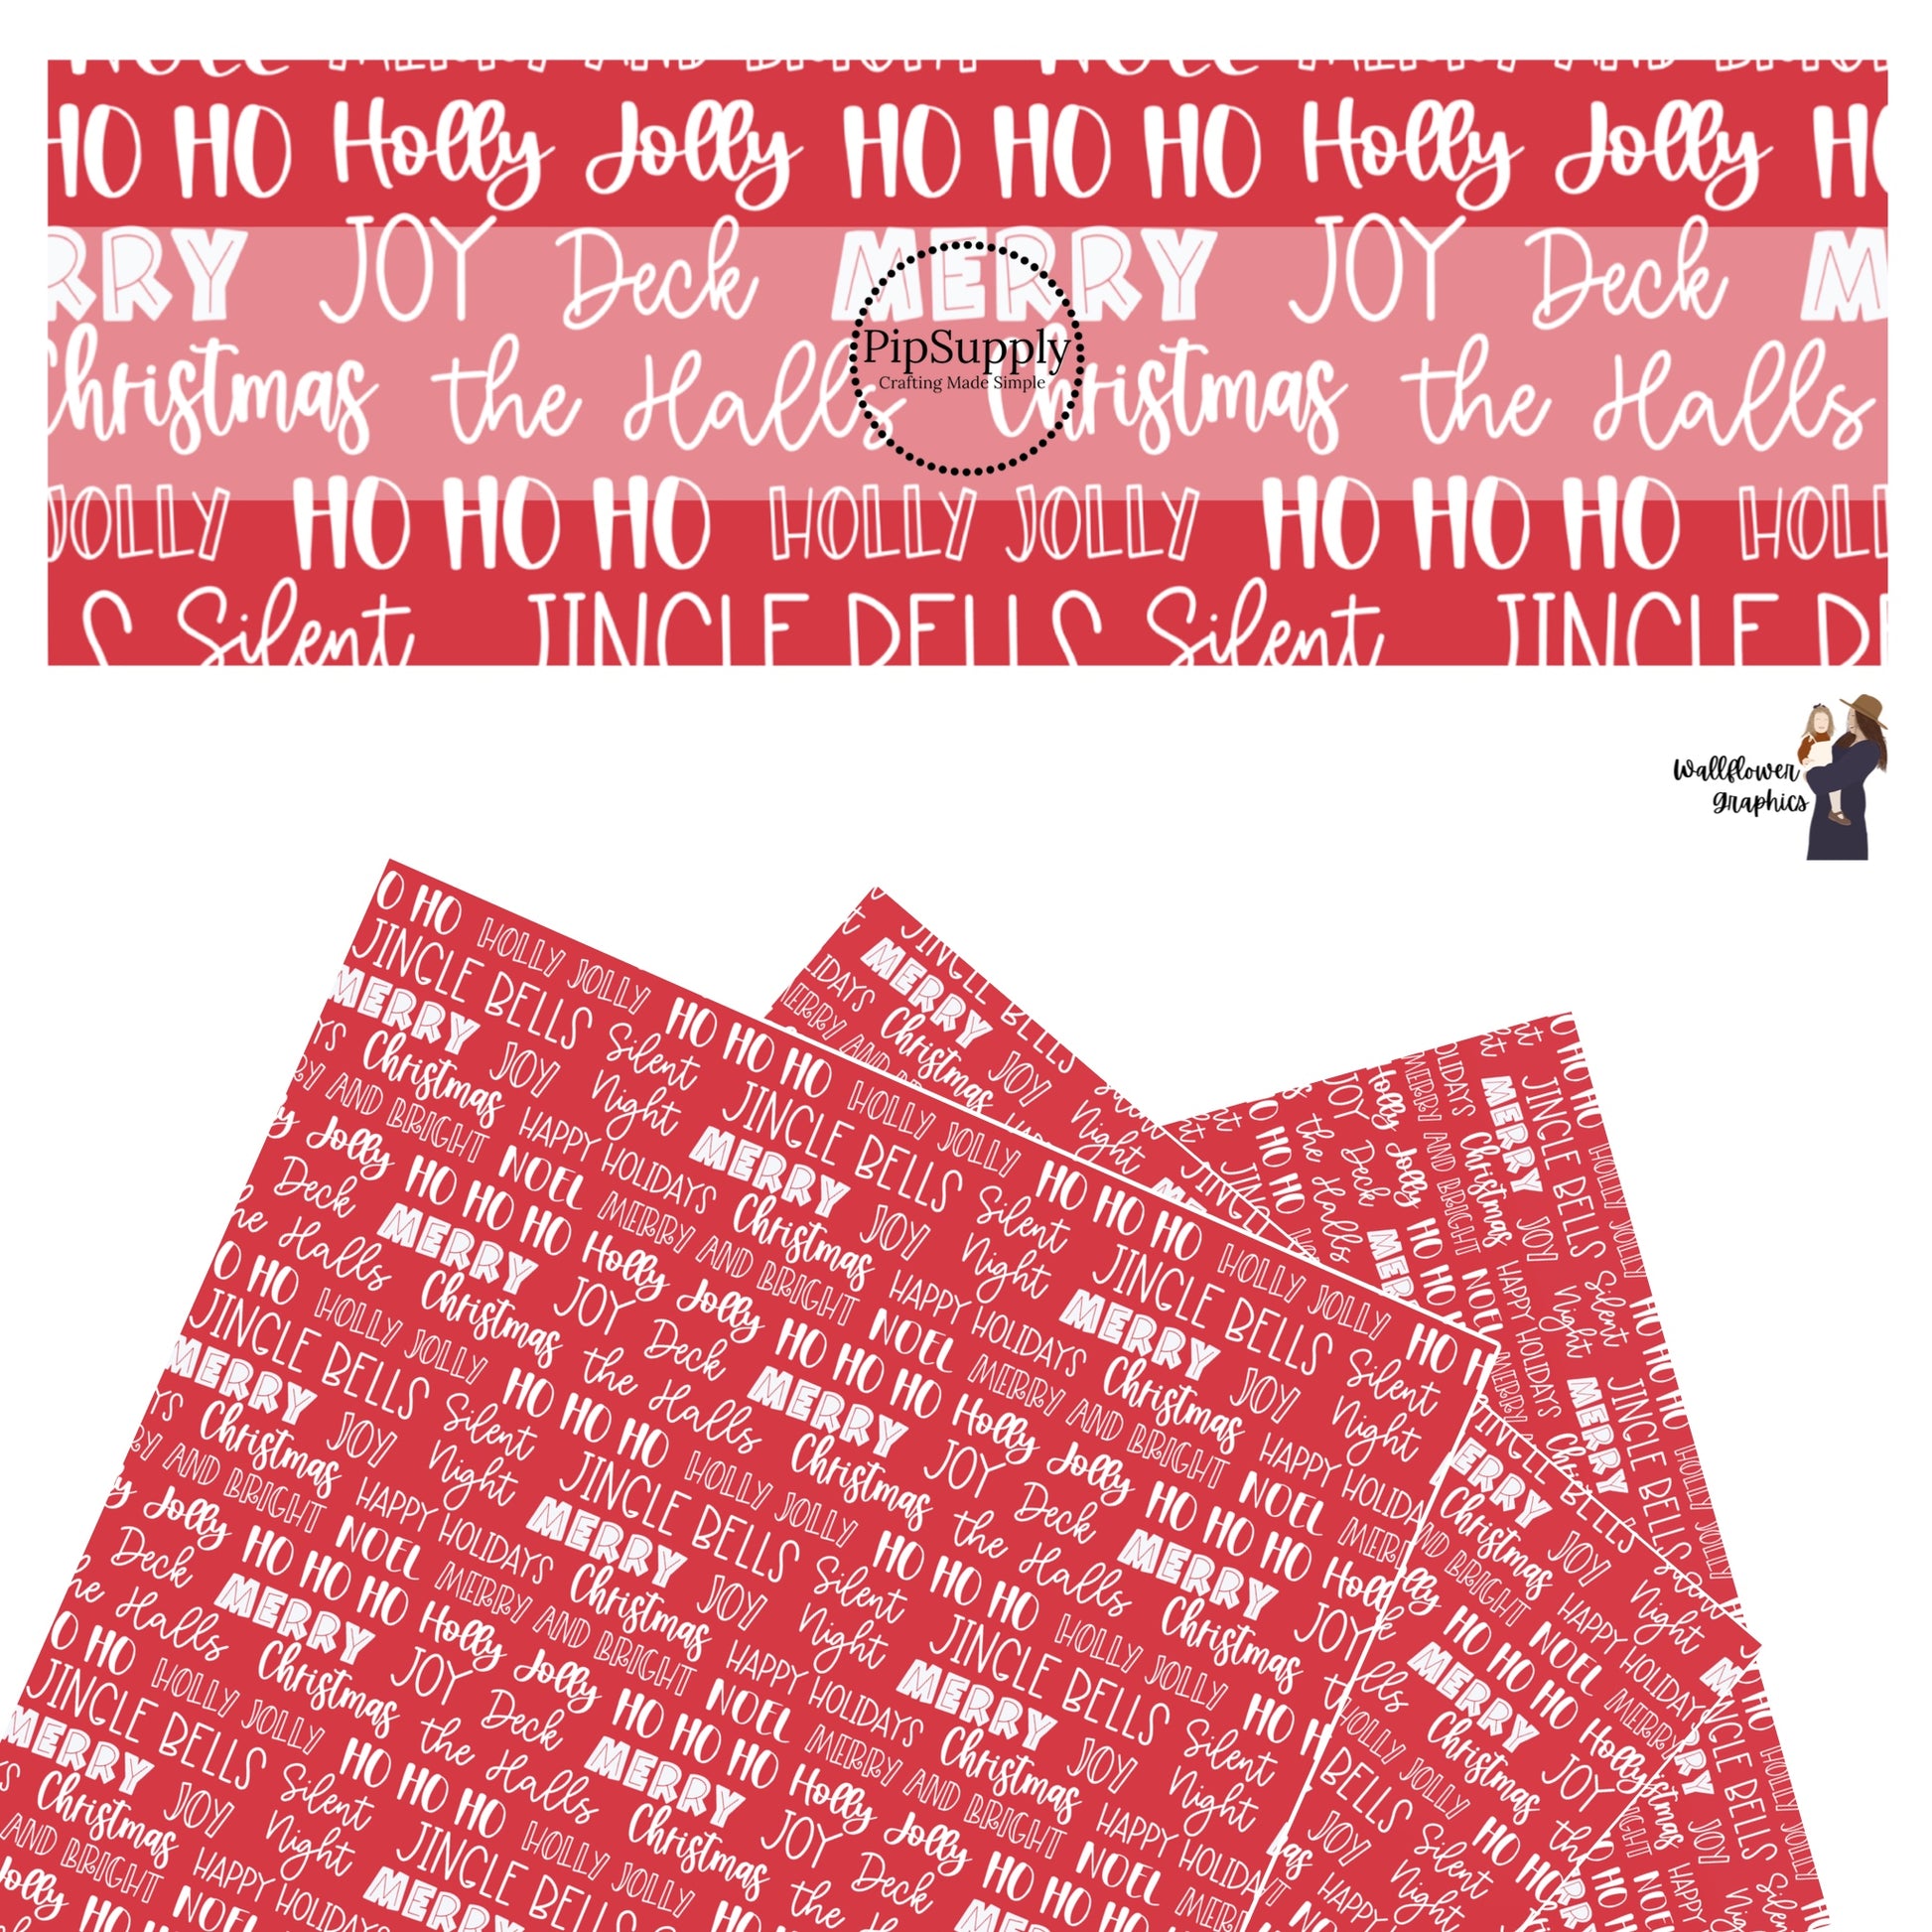 White fancy fonts with holiday sayings on red faux leather sheets